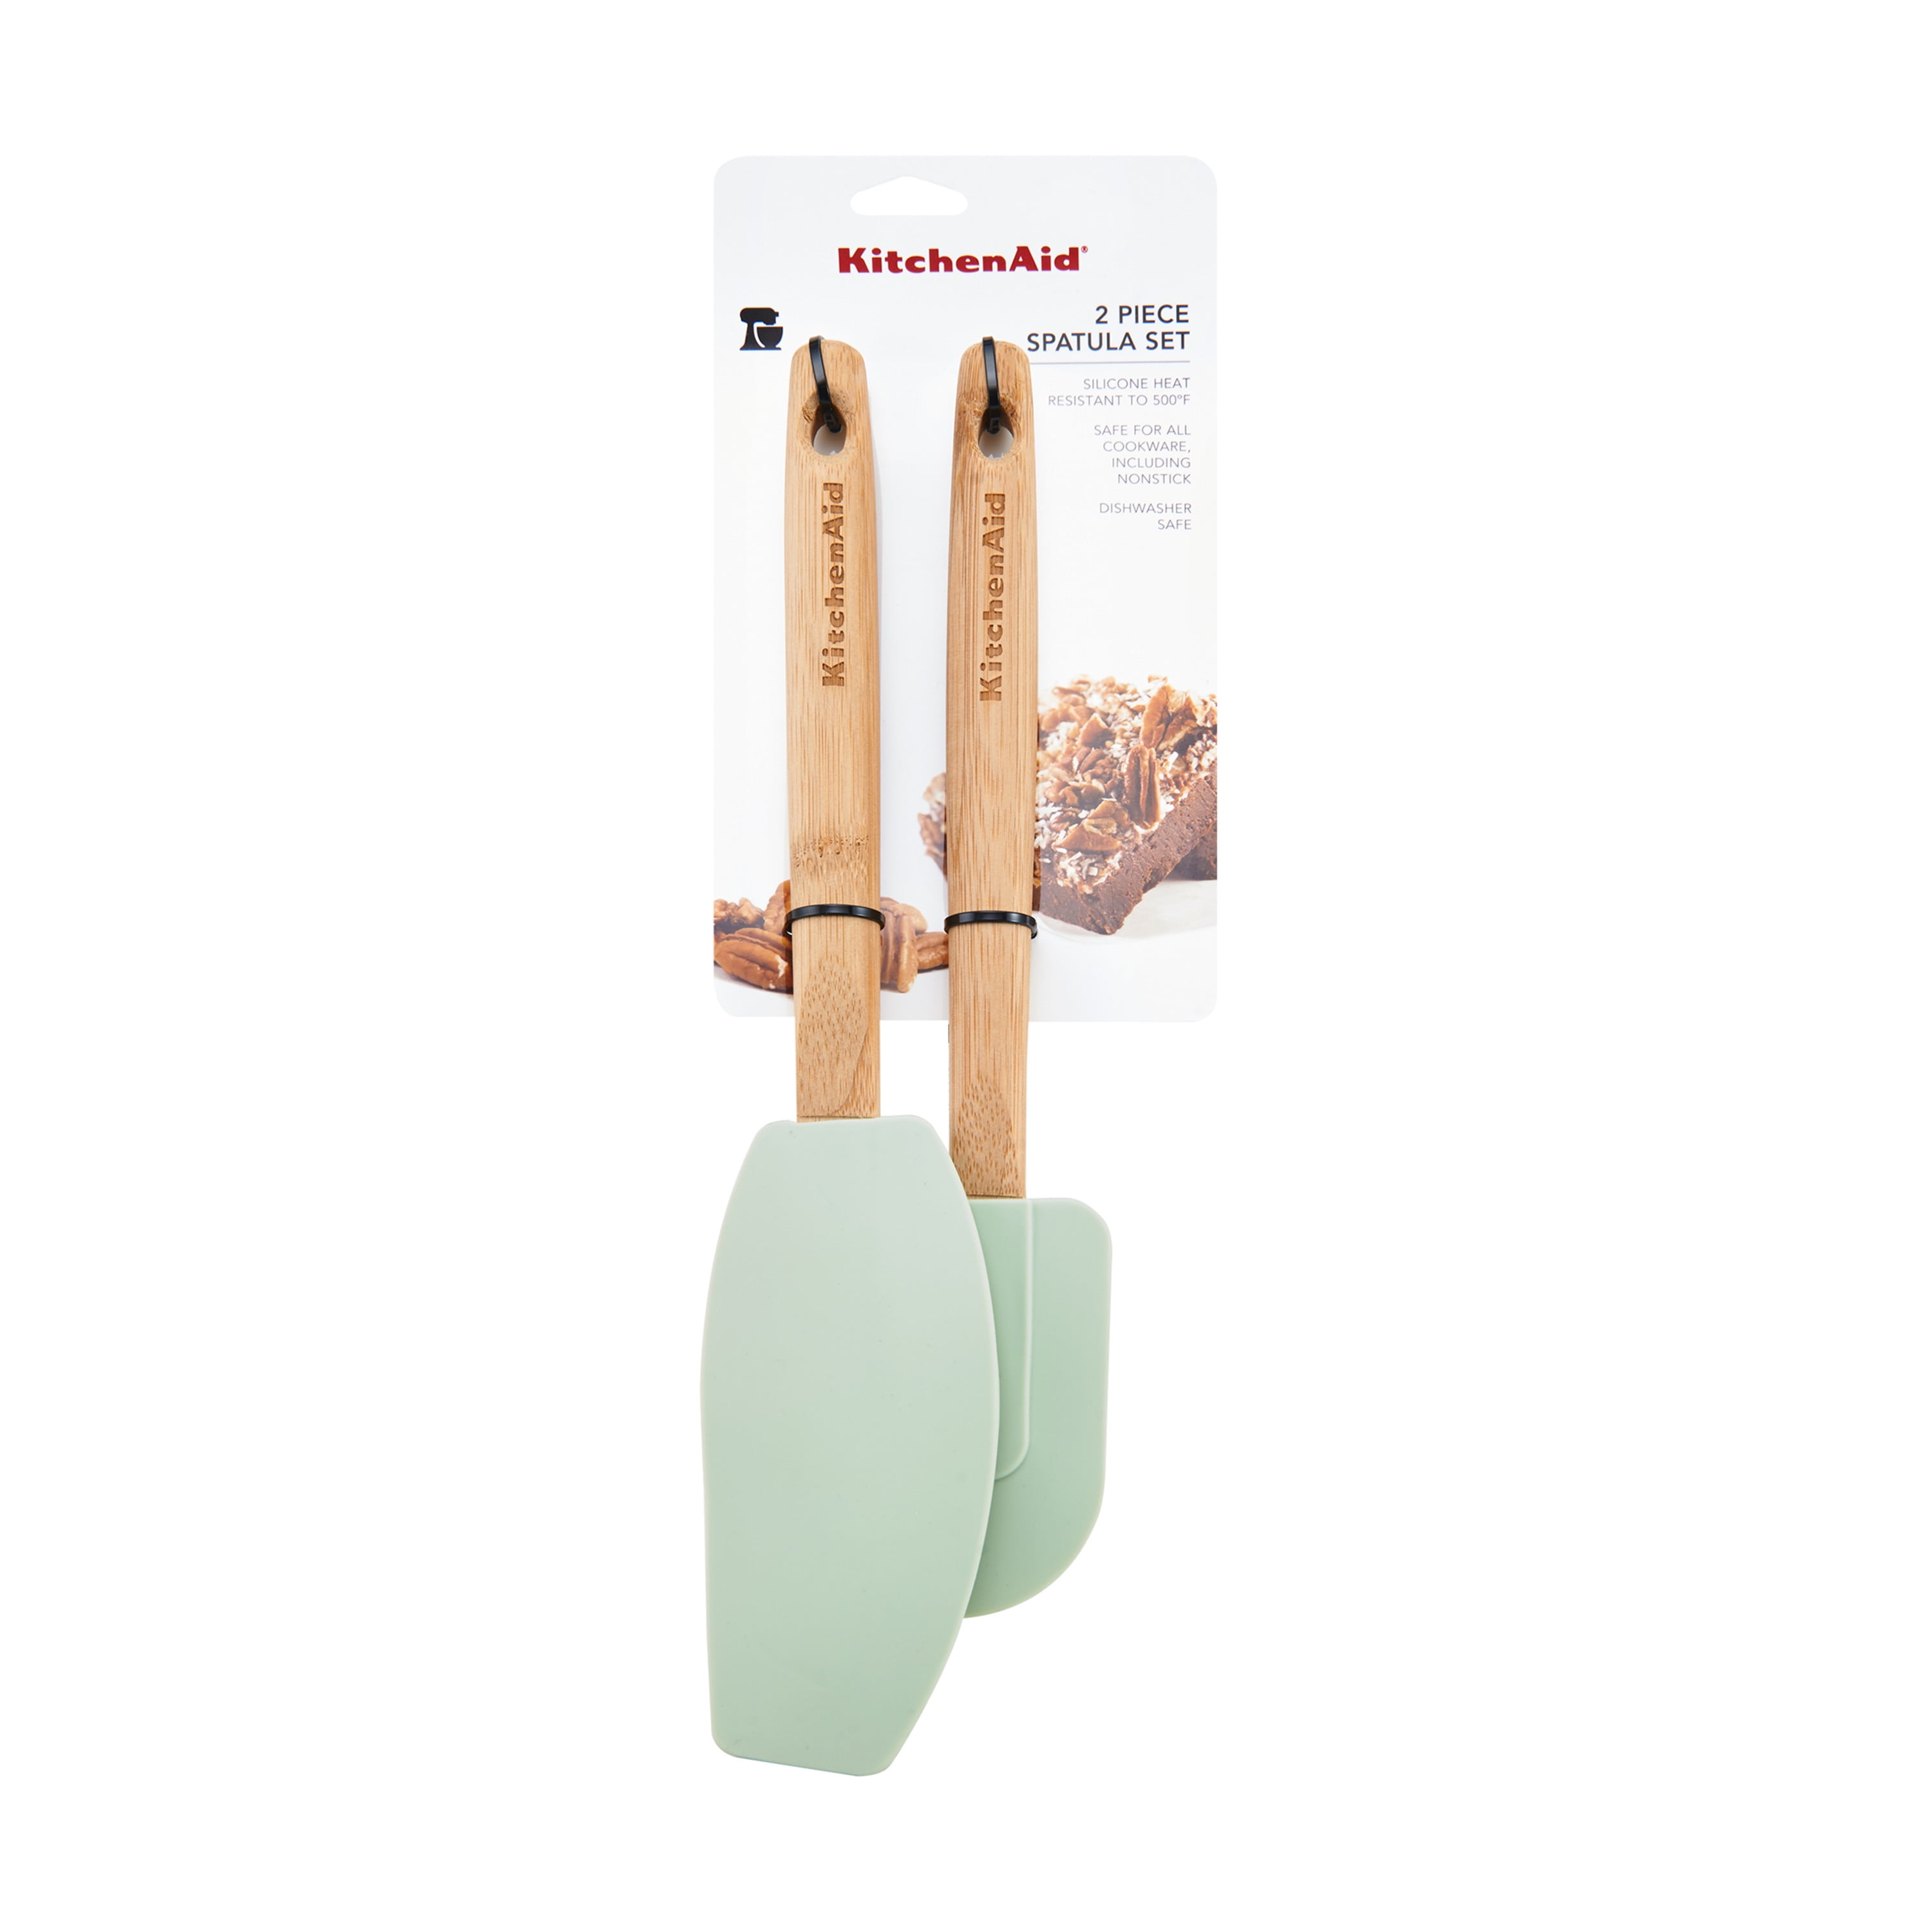 Kitchenaid Bamboo and Silicone 2-piece Spatula Set in Empire Red 